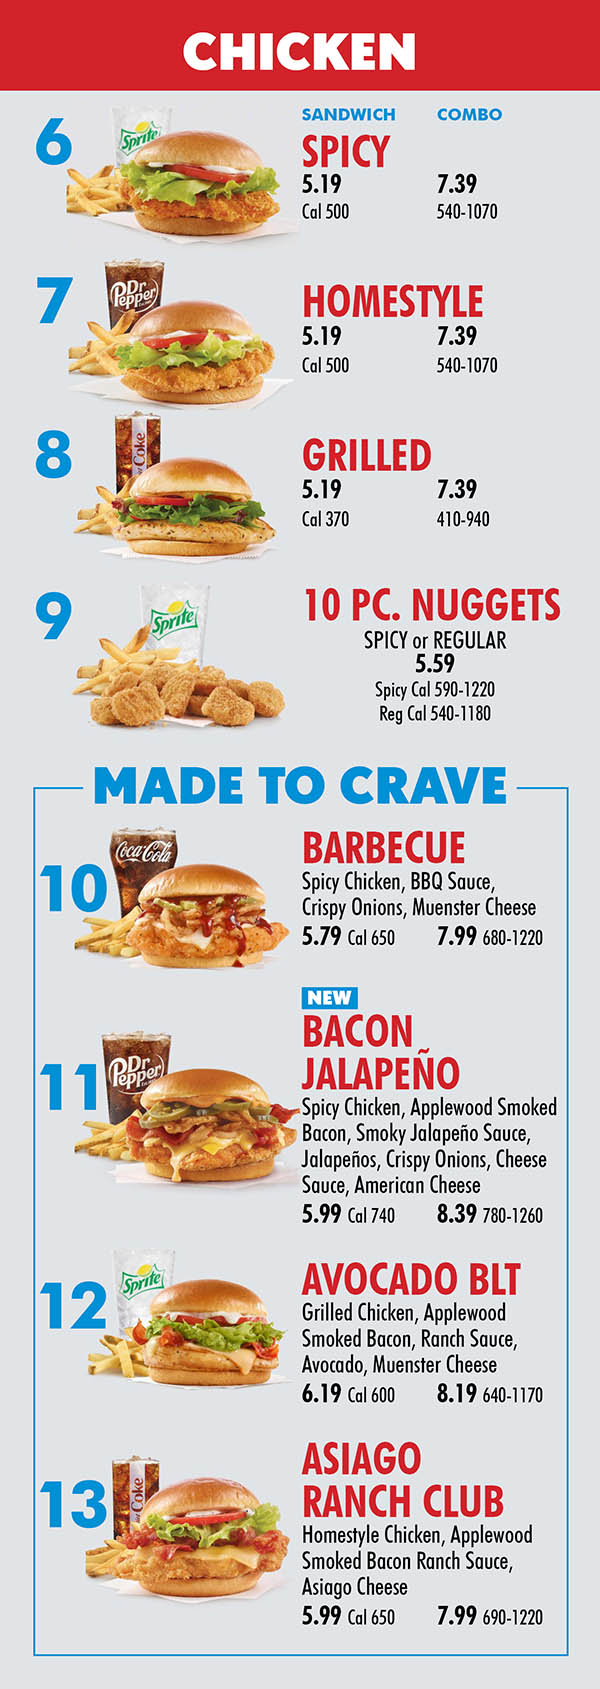 Wendy's S 48th St Lincoln NE Menu Page 2
CHICKEN
6
MADE TO CRAVE
10
11
12
7
8
SANDWICH COMBO
SPICY
5.19 7.39
Cal 500 540-1070
HOMESTYLE
5.19 7.39
Cal 500 540-1070
GRILLED
5.19 7.39
Cal 370 410-940
10 PC. NUGGETS
SPICY or REGULAR
5.59
Spicy Cal 590-1220
Reg Cal 540-1180
BARBECUE
Spicy Chicken, BBQ Sauce,
Crispy Onions, Muenster Cheese
5.79 Cal 650 7.99 680-1220
BACON
JALAPEÑO
Spicy Chicken, Applewood Smoked Bacon, Smoky Jalapeño Sauce, Jalapeños, Crispy Onions, Cheese Sauce, American Cheese
5.99 Cal 740 8.39 780-1260
AVOCADO BLT
Grilled Chicken, Applewood
Smoked Bacon, Ranch Sauce,
Avocado, Muenster Cheese
6.19 Cal 600 8.19 640-1170
ASIAGO
RANCH CLUB
Homestyle Chicken, Applewood
Smoked Bacon Ranch Sauce,
Asiago Cheese
5.99 Cal 650 7.99 690-1220